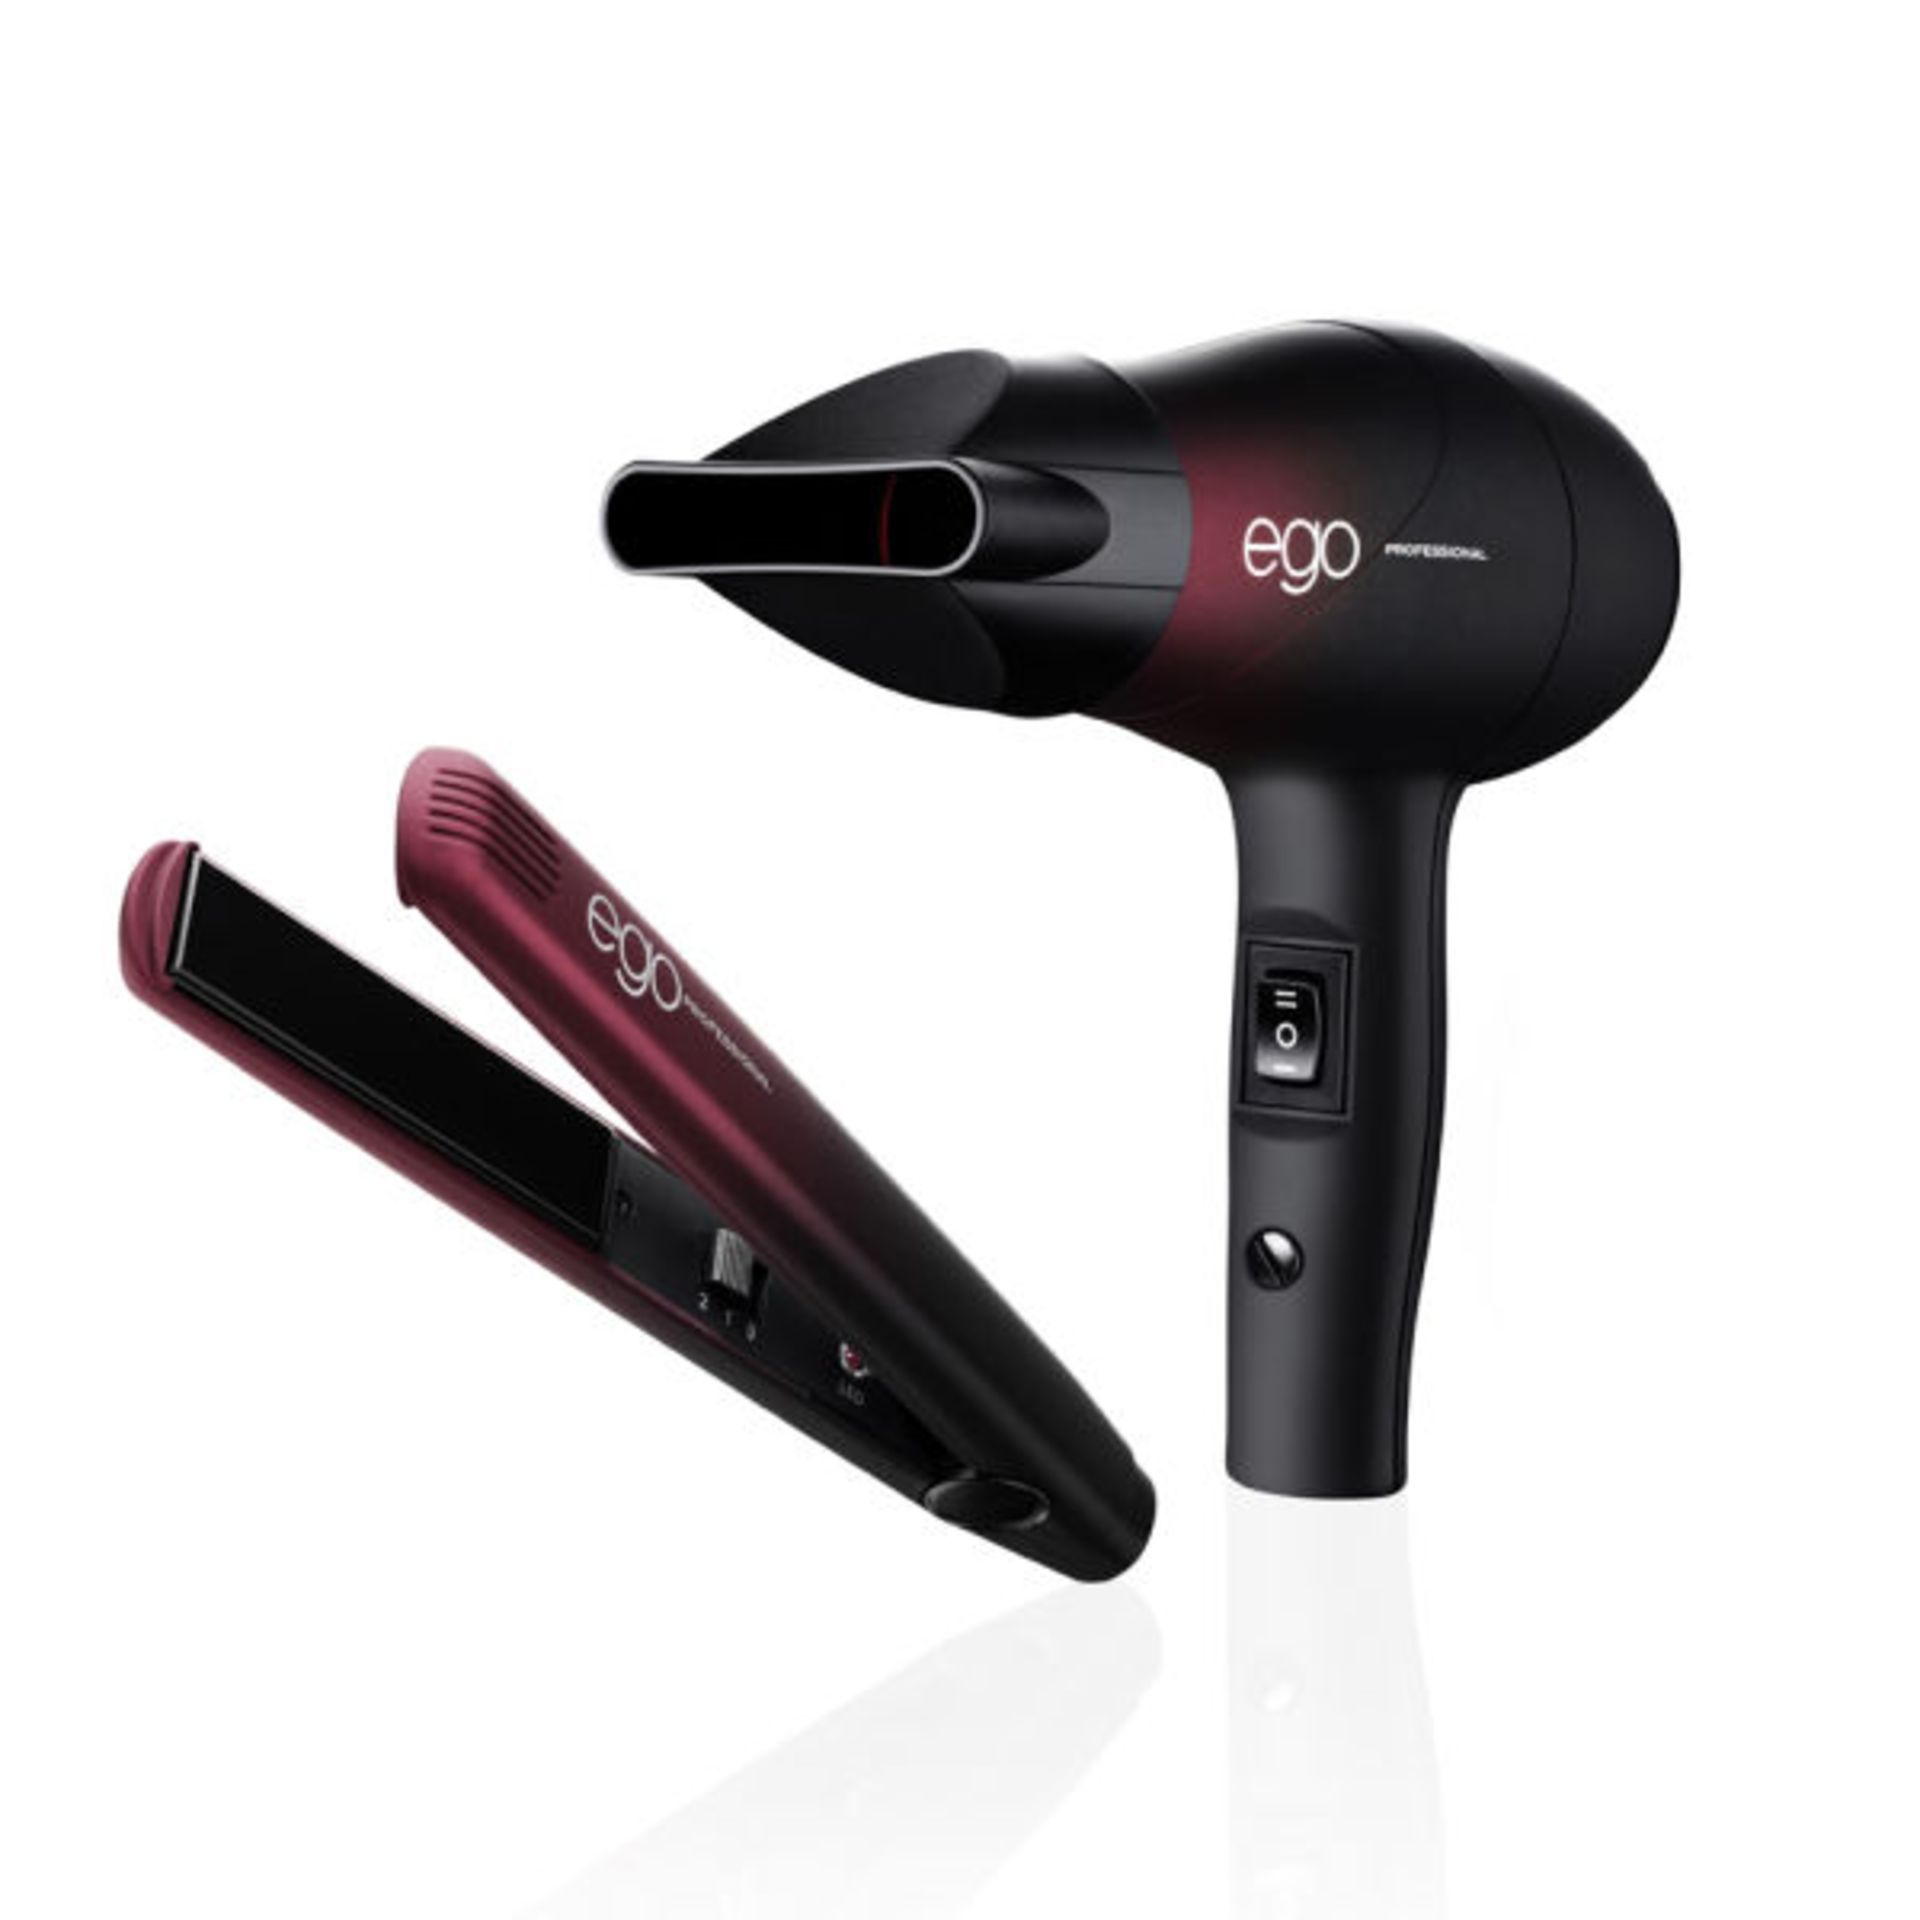 1 x Ego Professional Full On And Fabulous Ego Set (Alter Ego Hairdryer And Little Iron) [Grade A] - Bild 4 aus 4